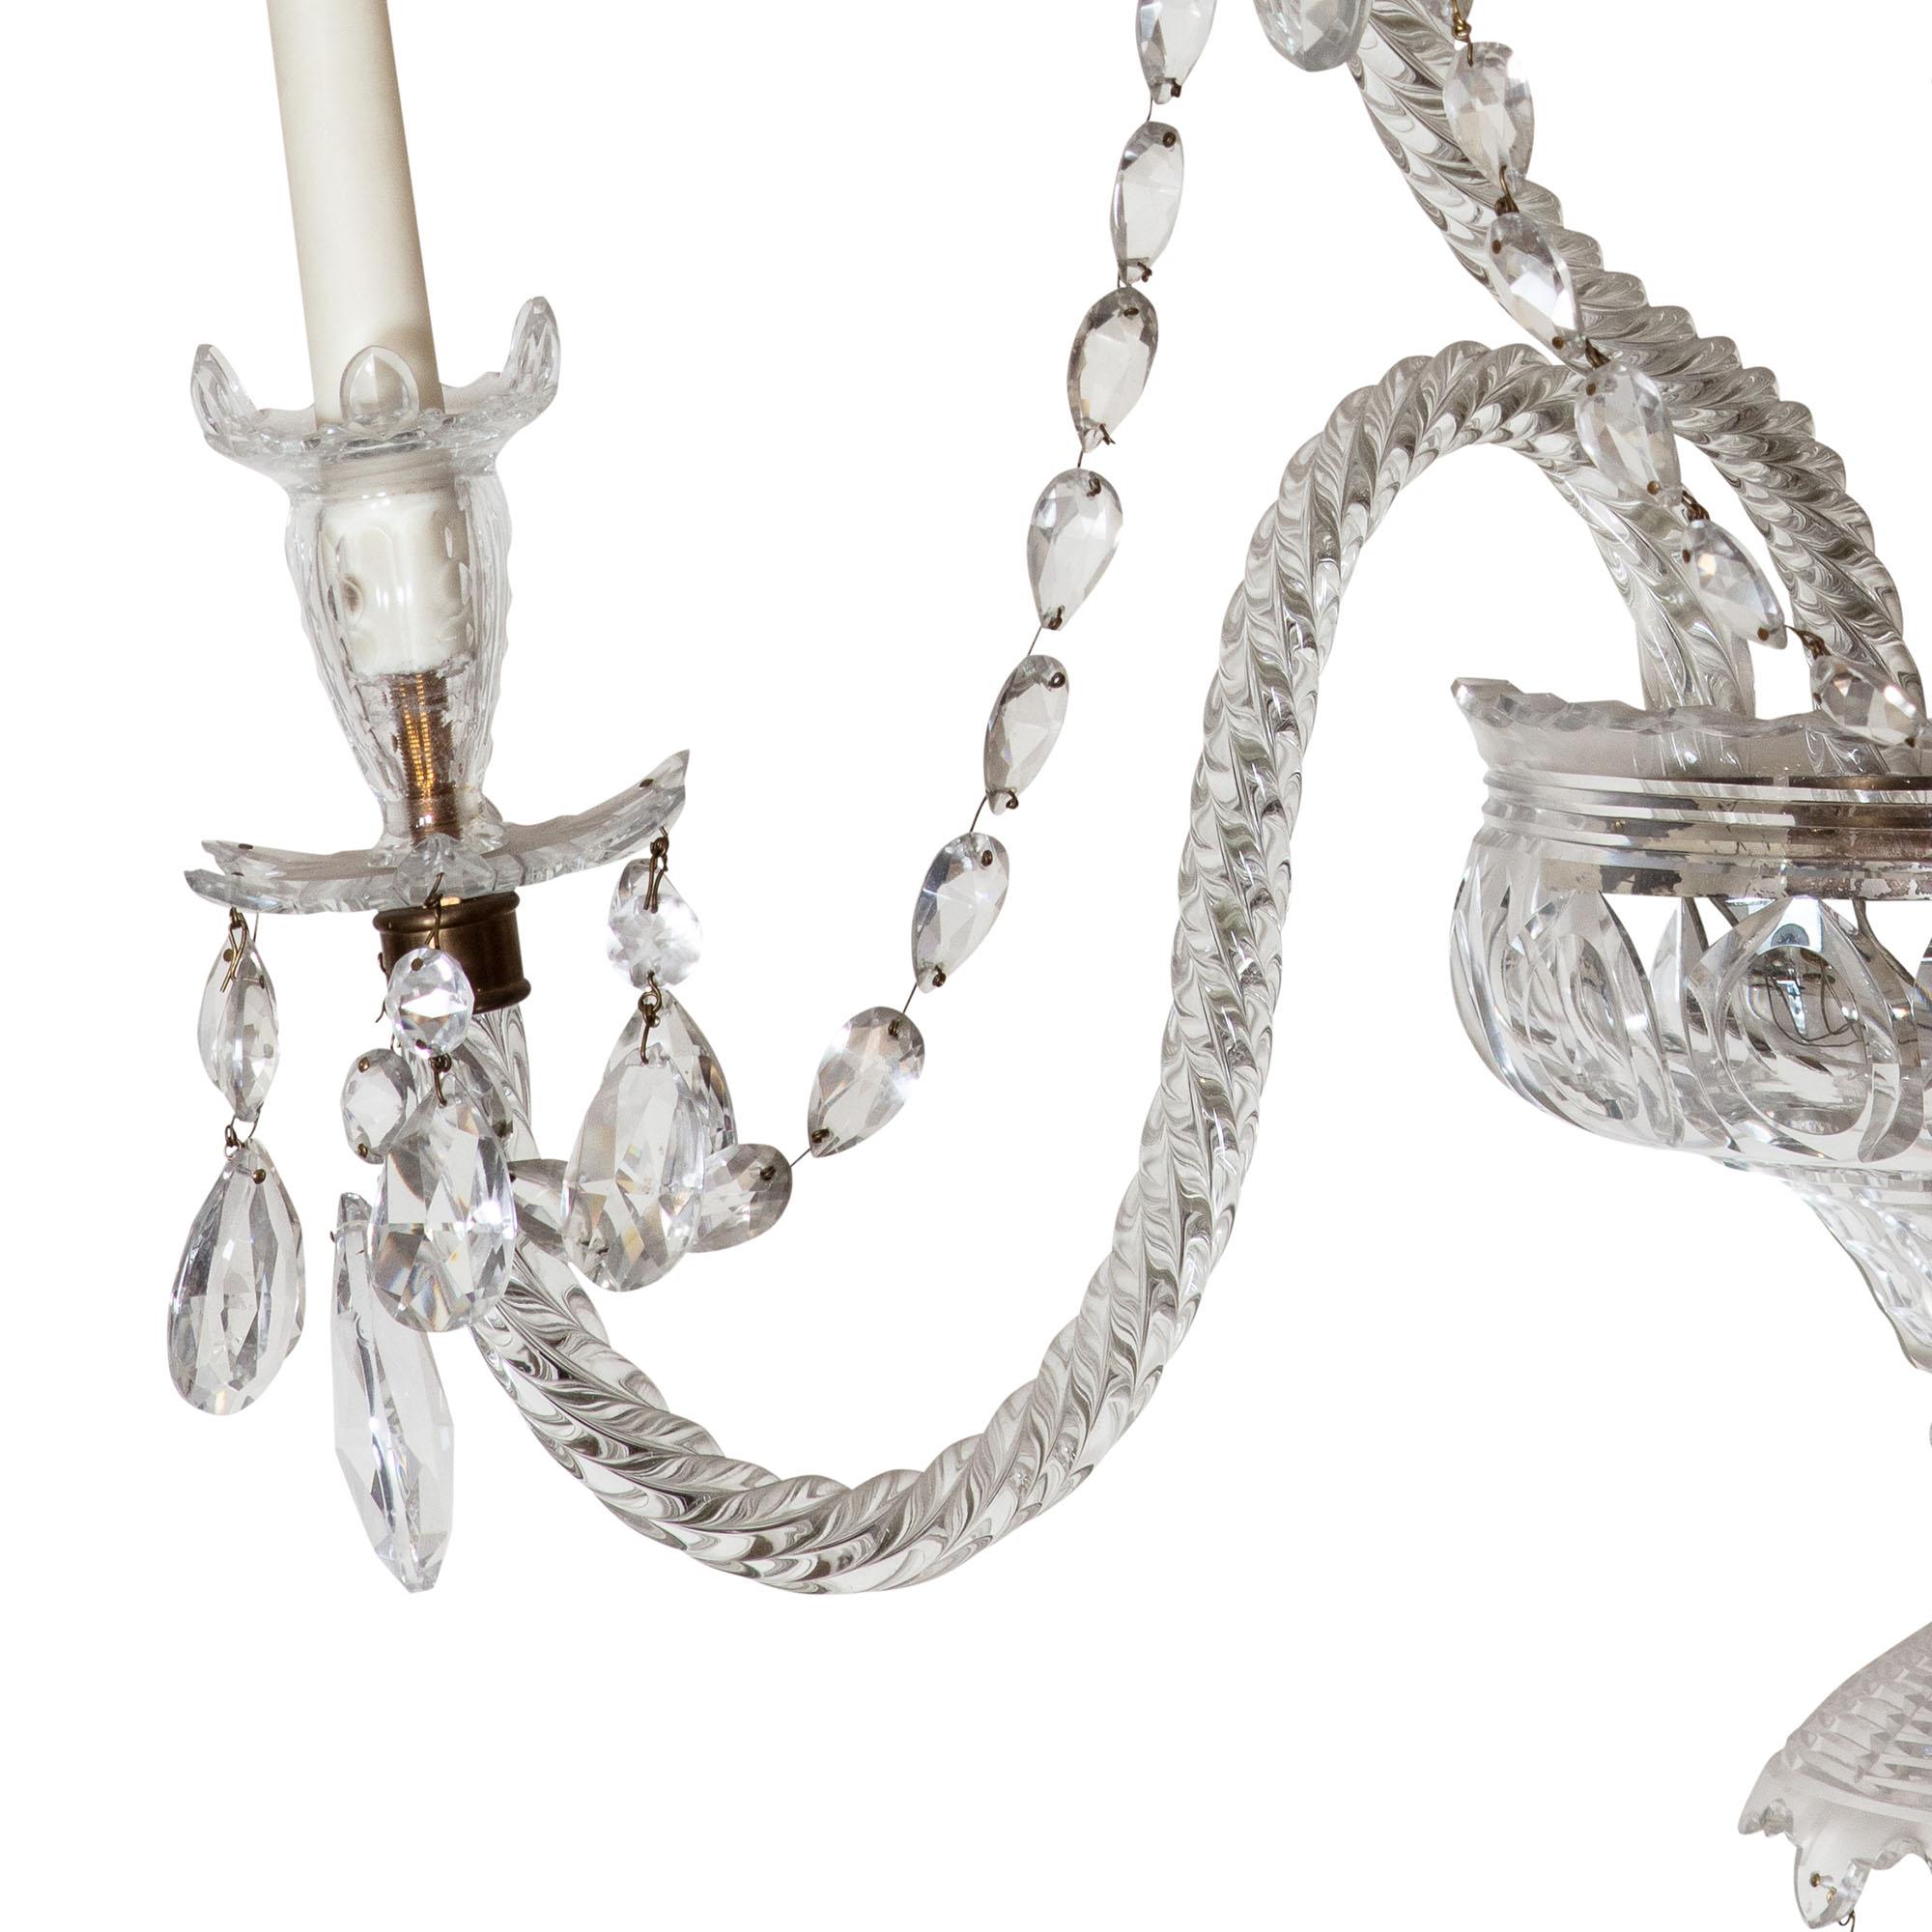 English A Pair of Palatial 19th Century Cut Glass Five-Light Wall Lights For Sale